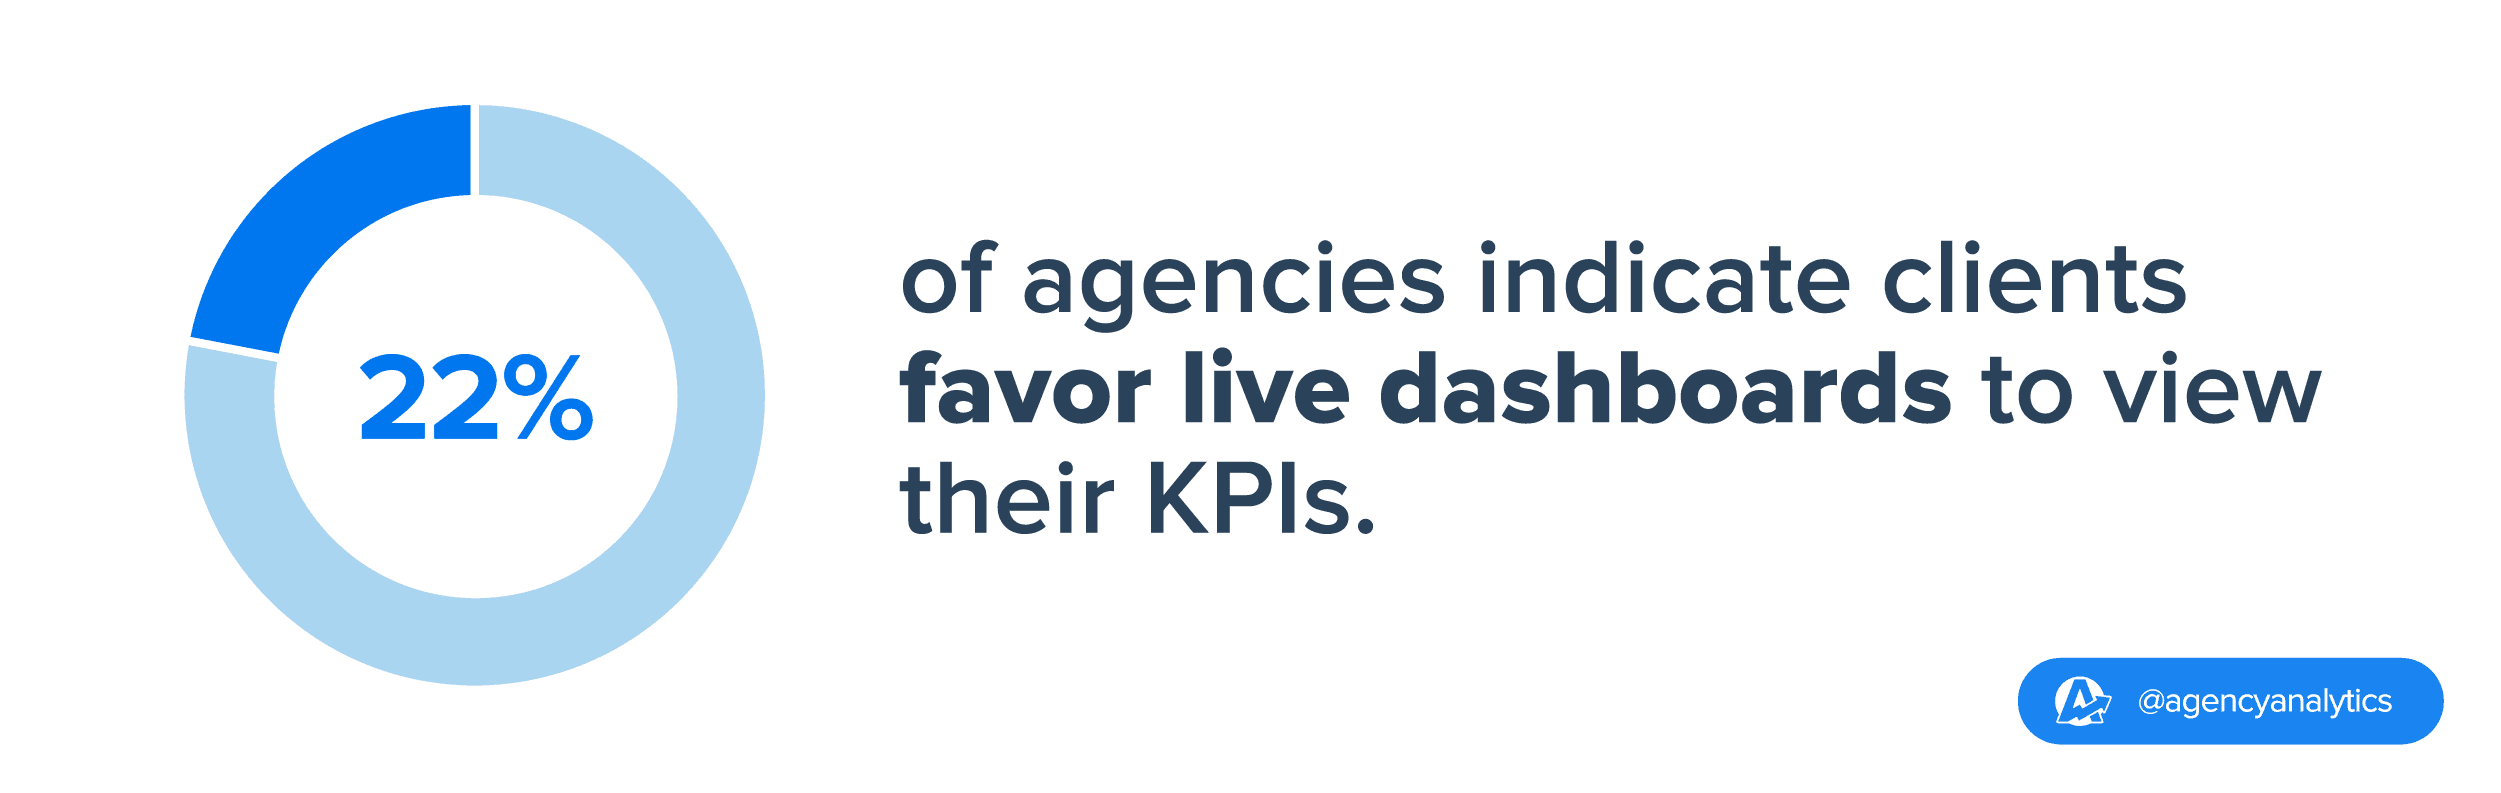 stat on kpi viewing preferences in client reporting 